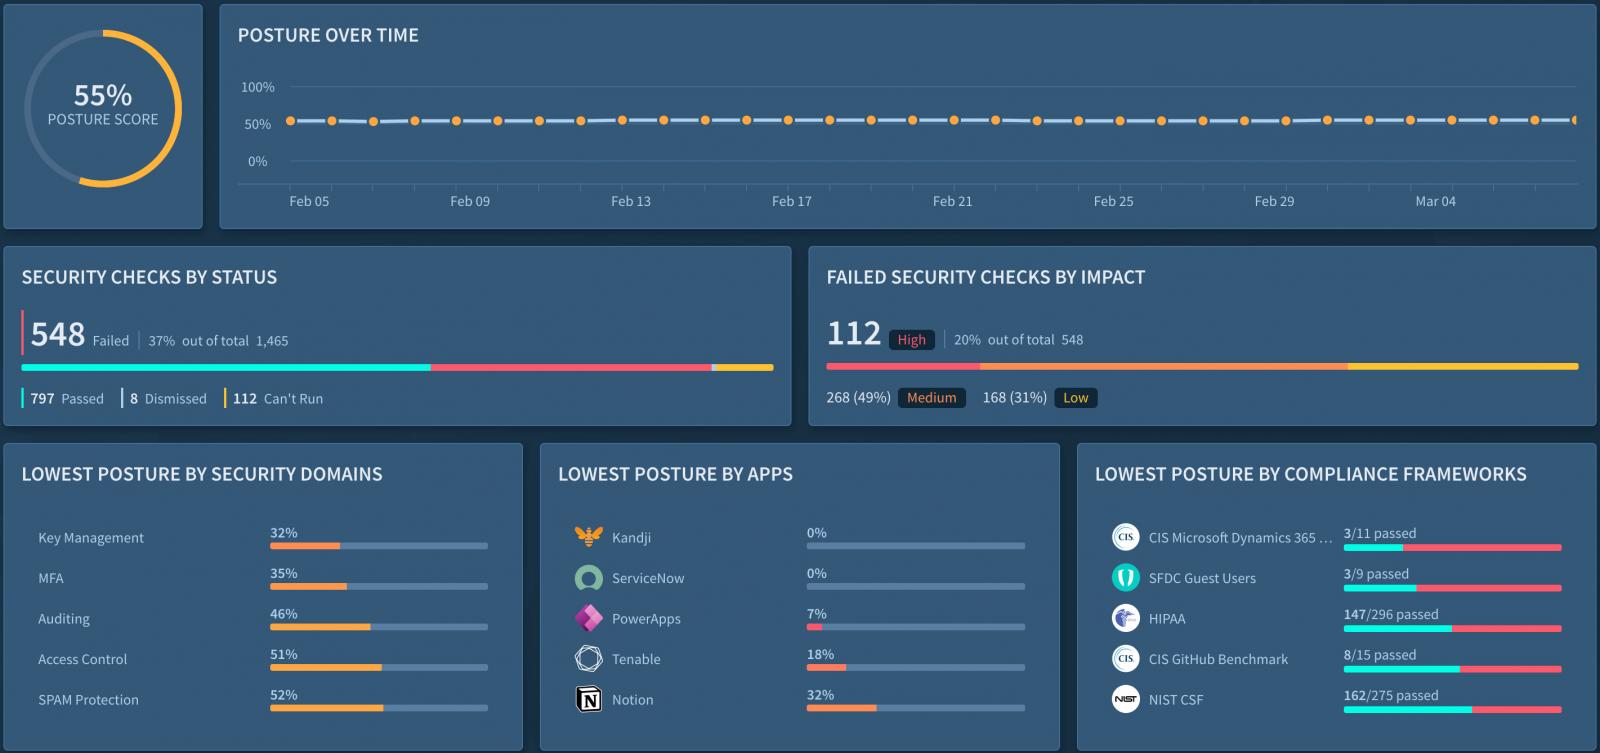 Figure 2: The Adaptive Shield platform provides a dashboard view of SaaS security posture